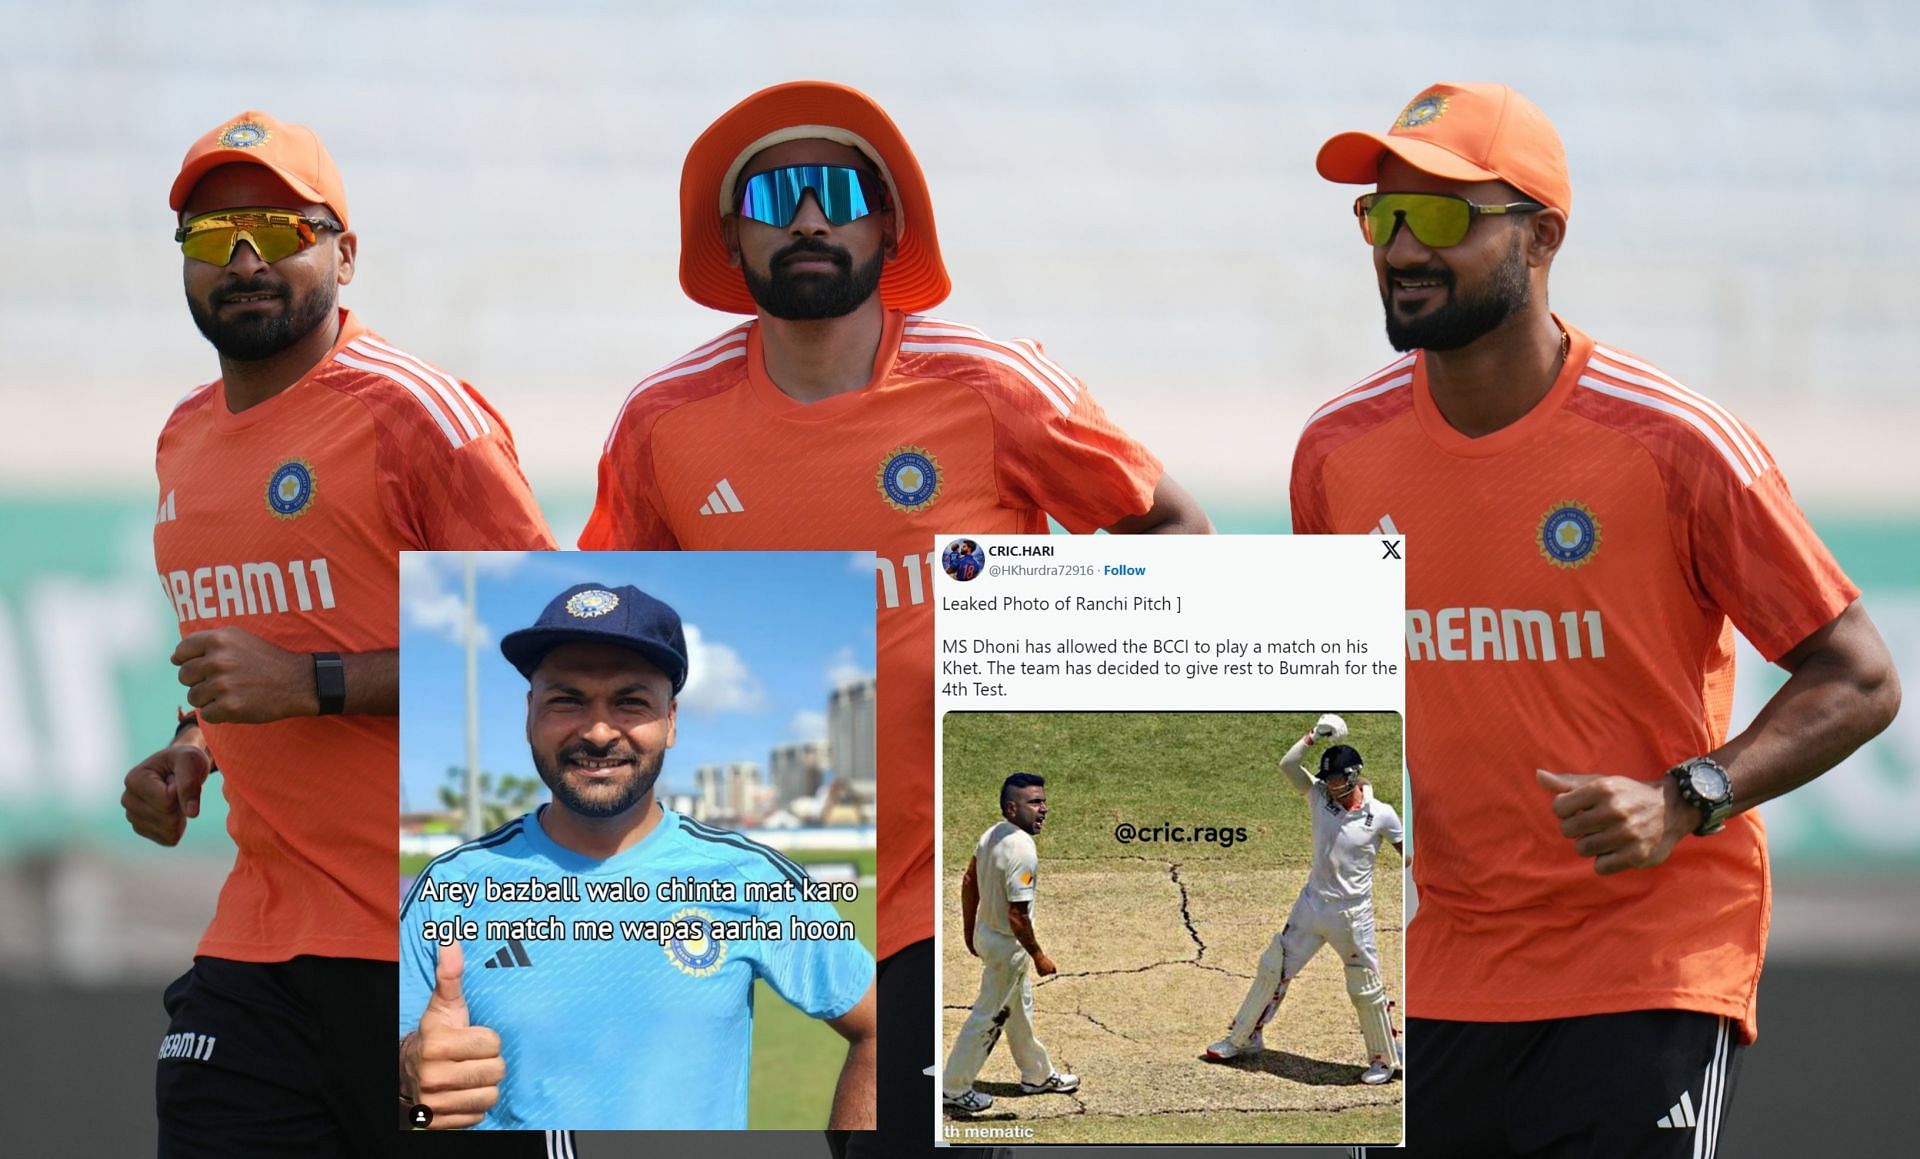 Fans react ahead of 4th Test between India and England.